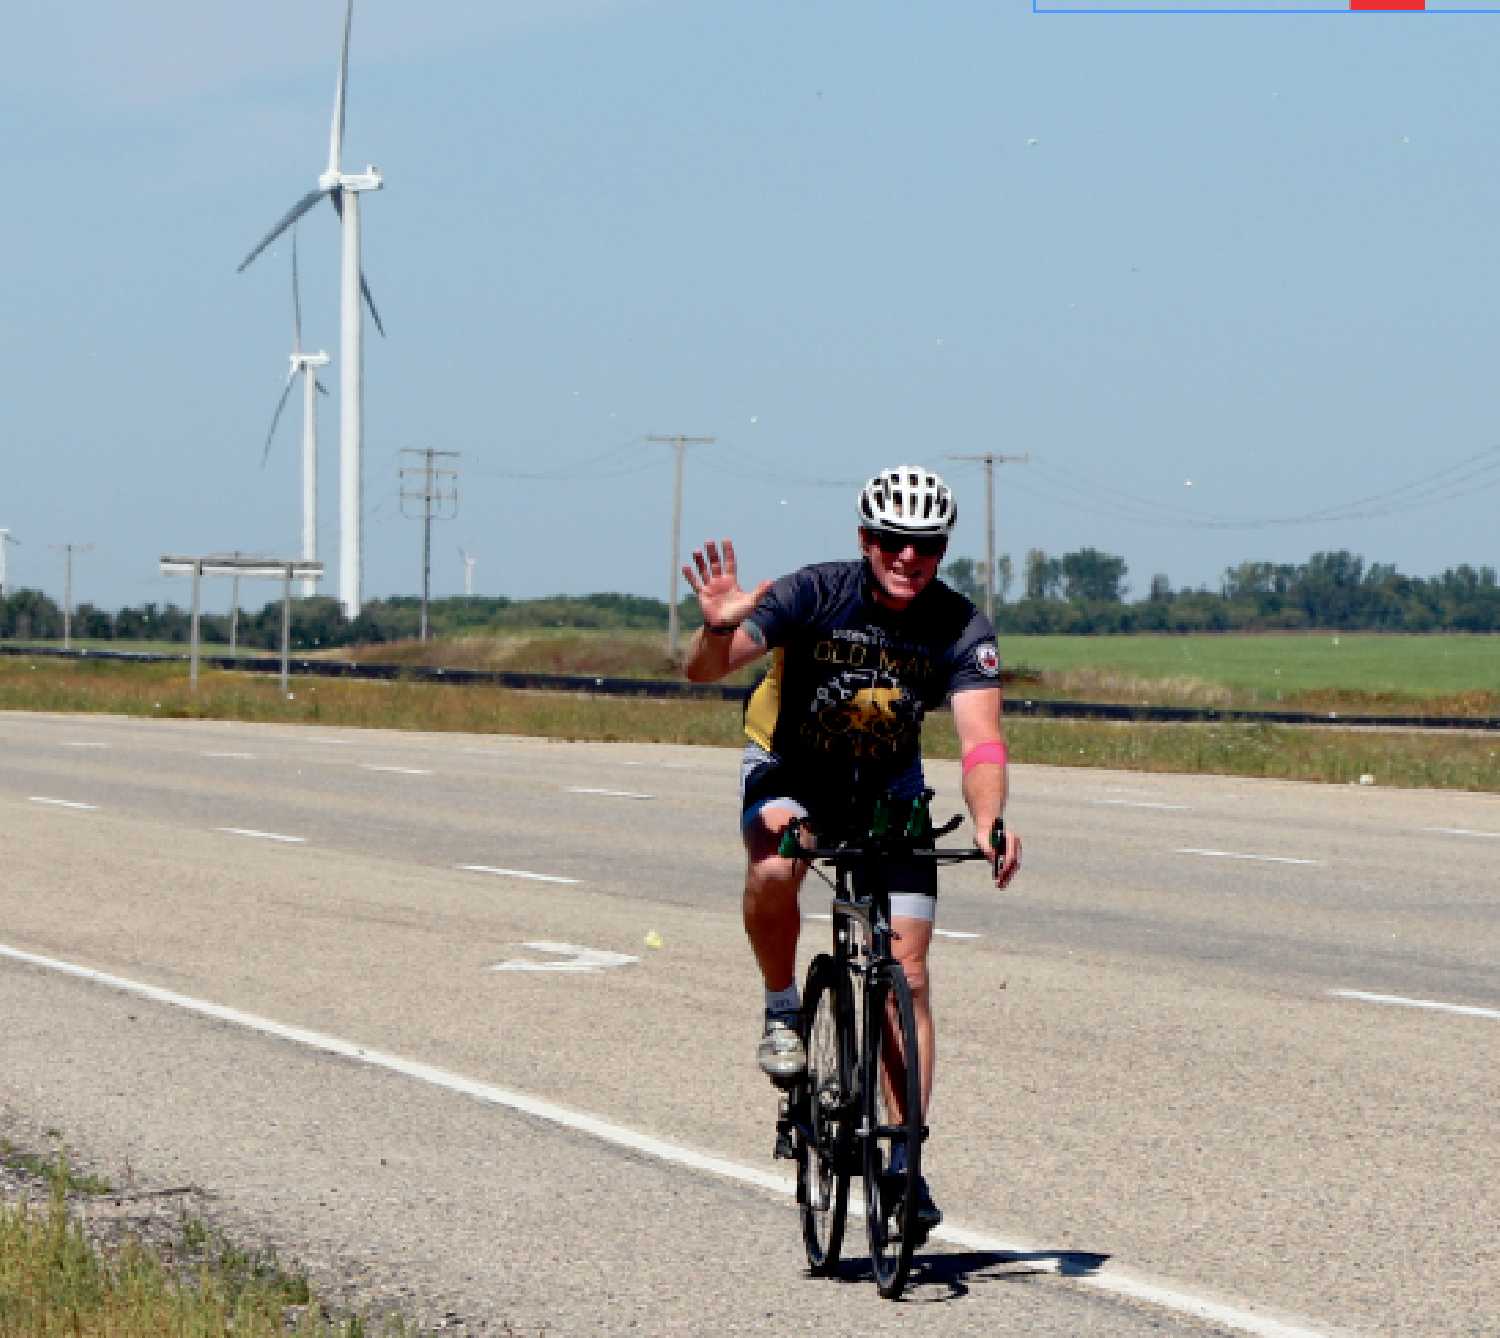 Sgt. Rob Nederlof passed through Moosomin last week on his ride to riase awareness and funds for PTSD service dogs.